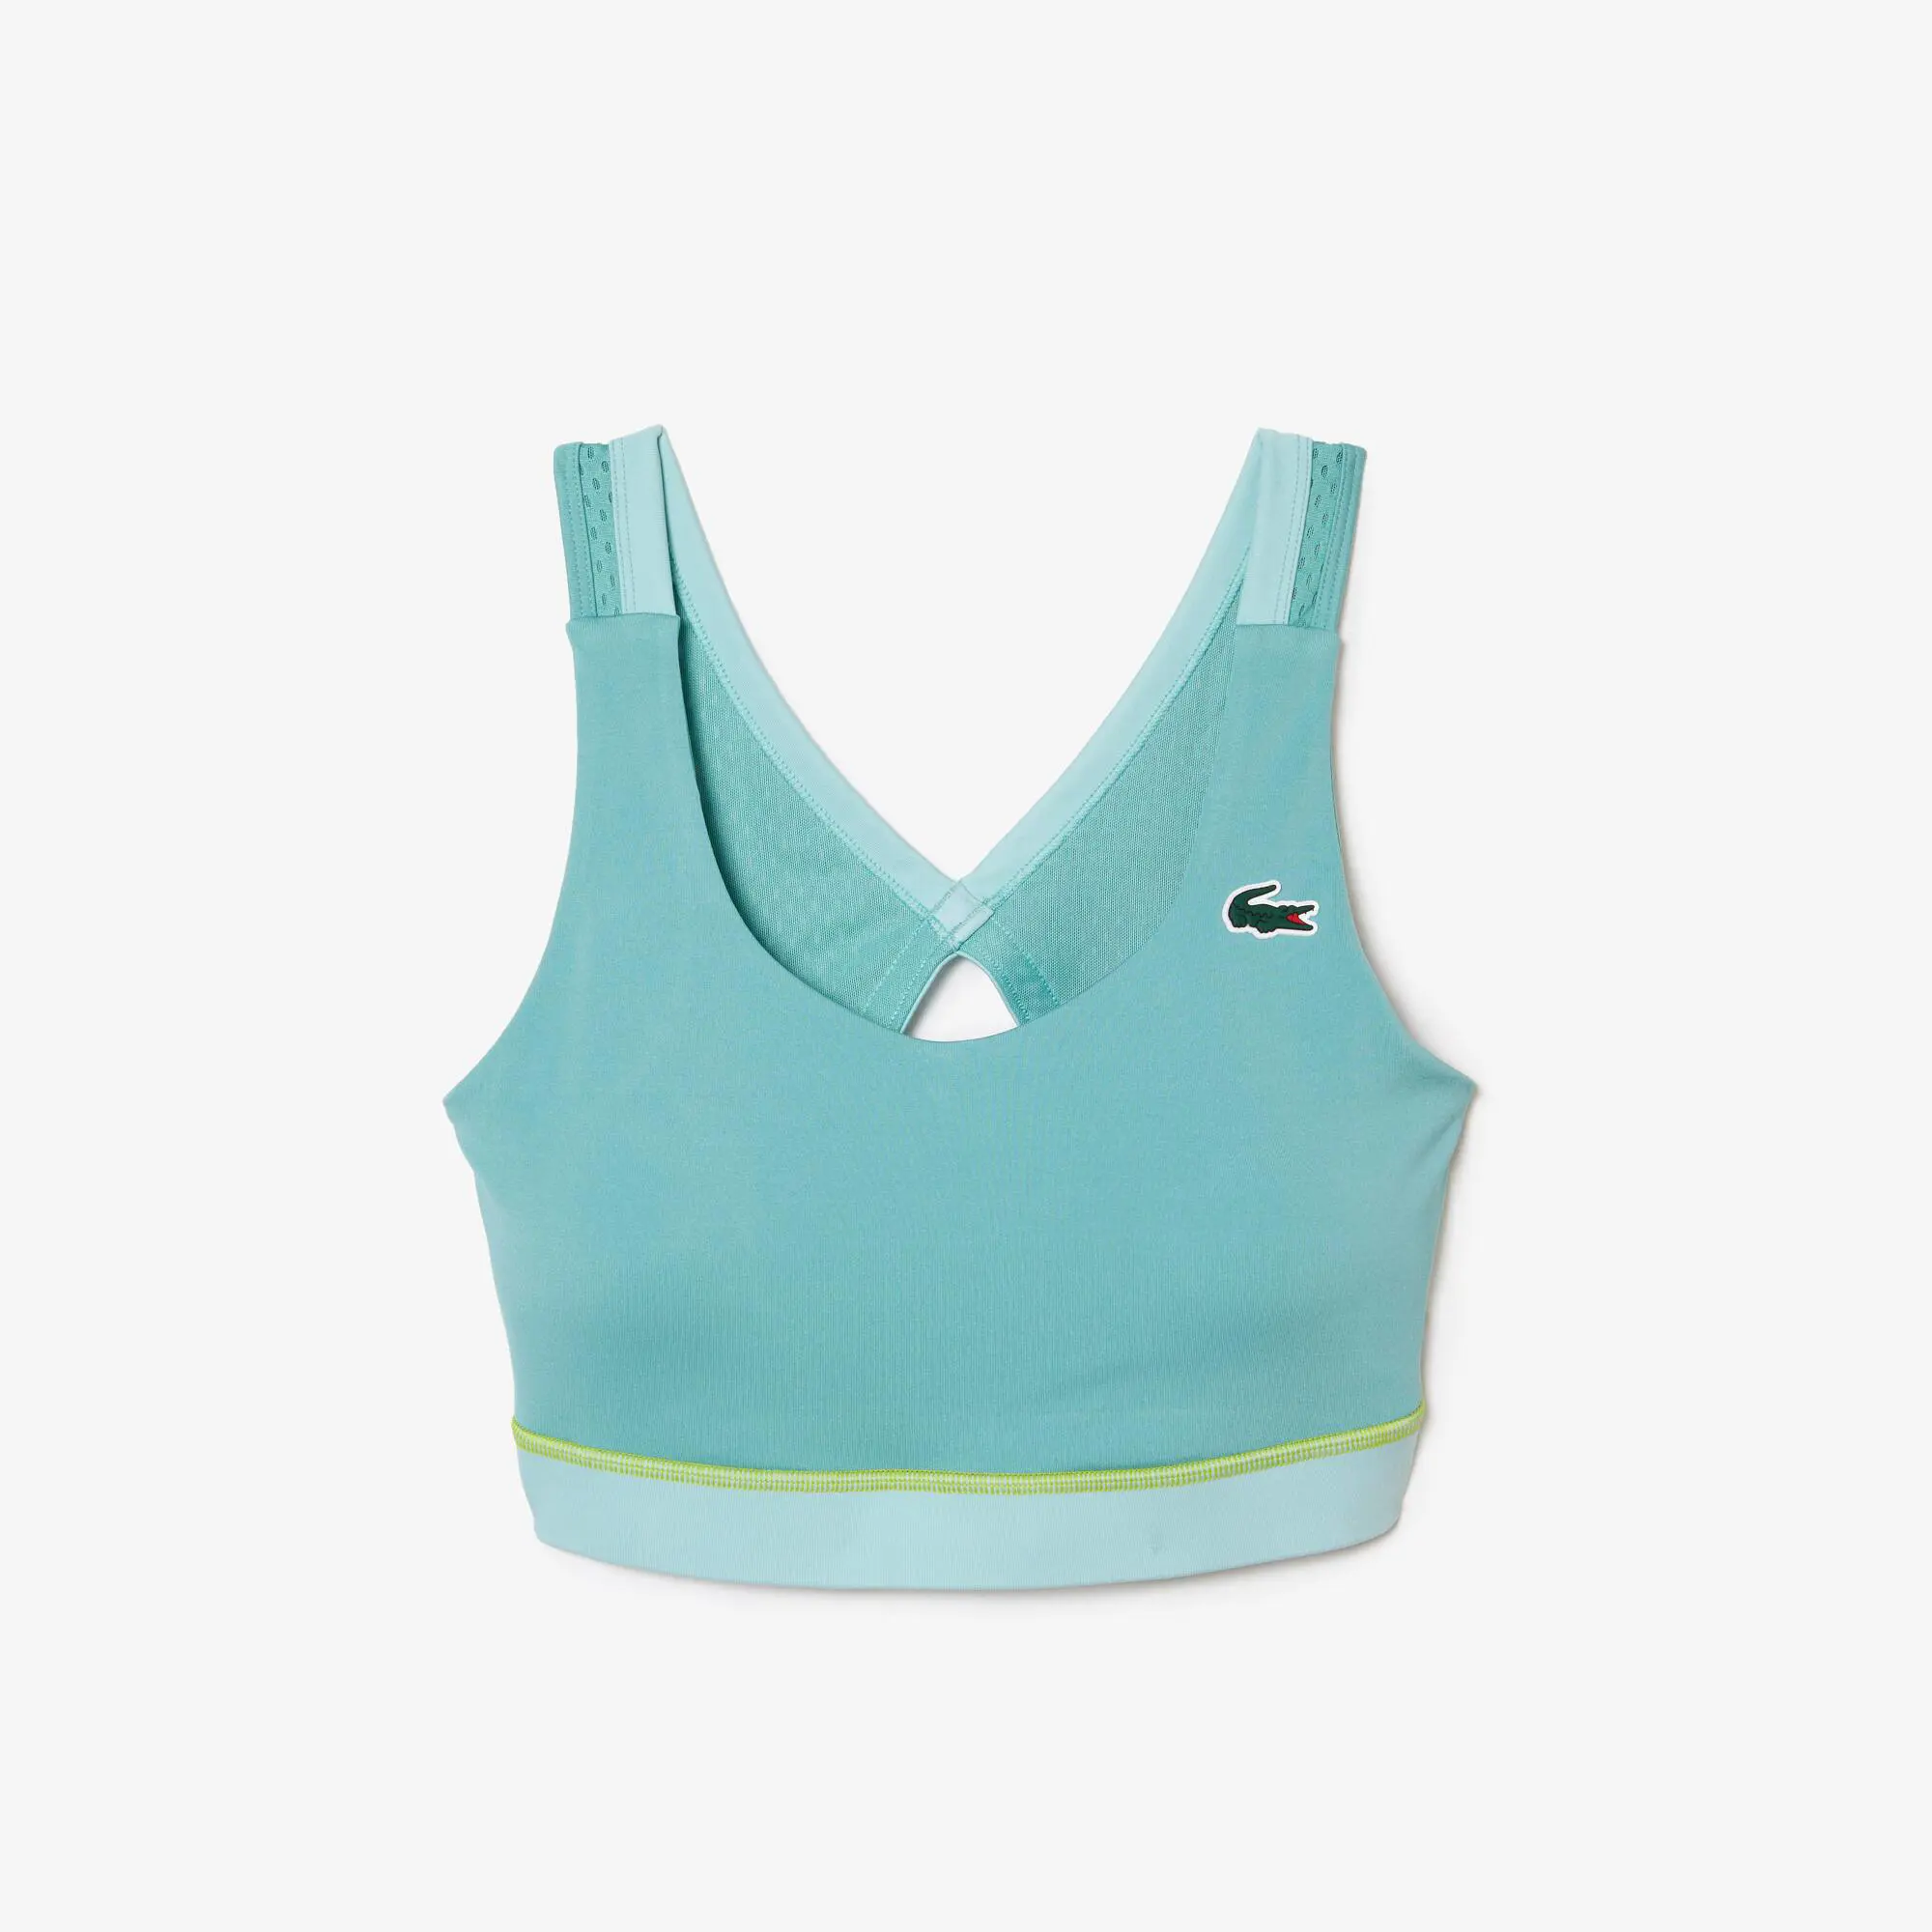 Lacoste Women’s Lacoste Sport Ultra-Dry Recycled Polyester Sports Bra. 2